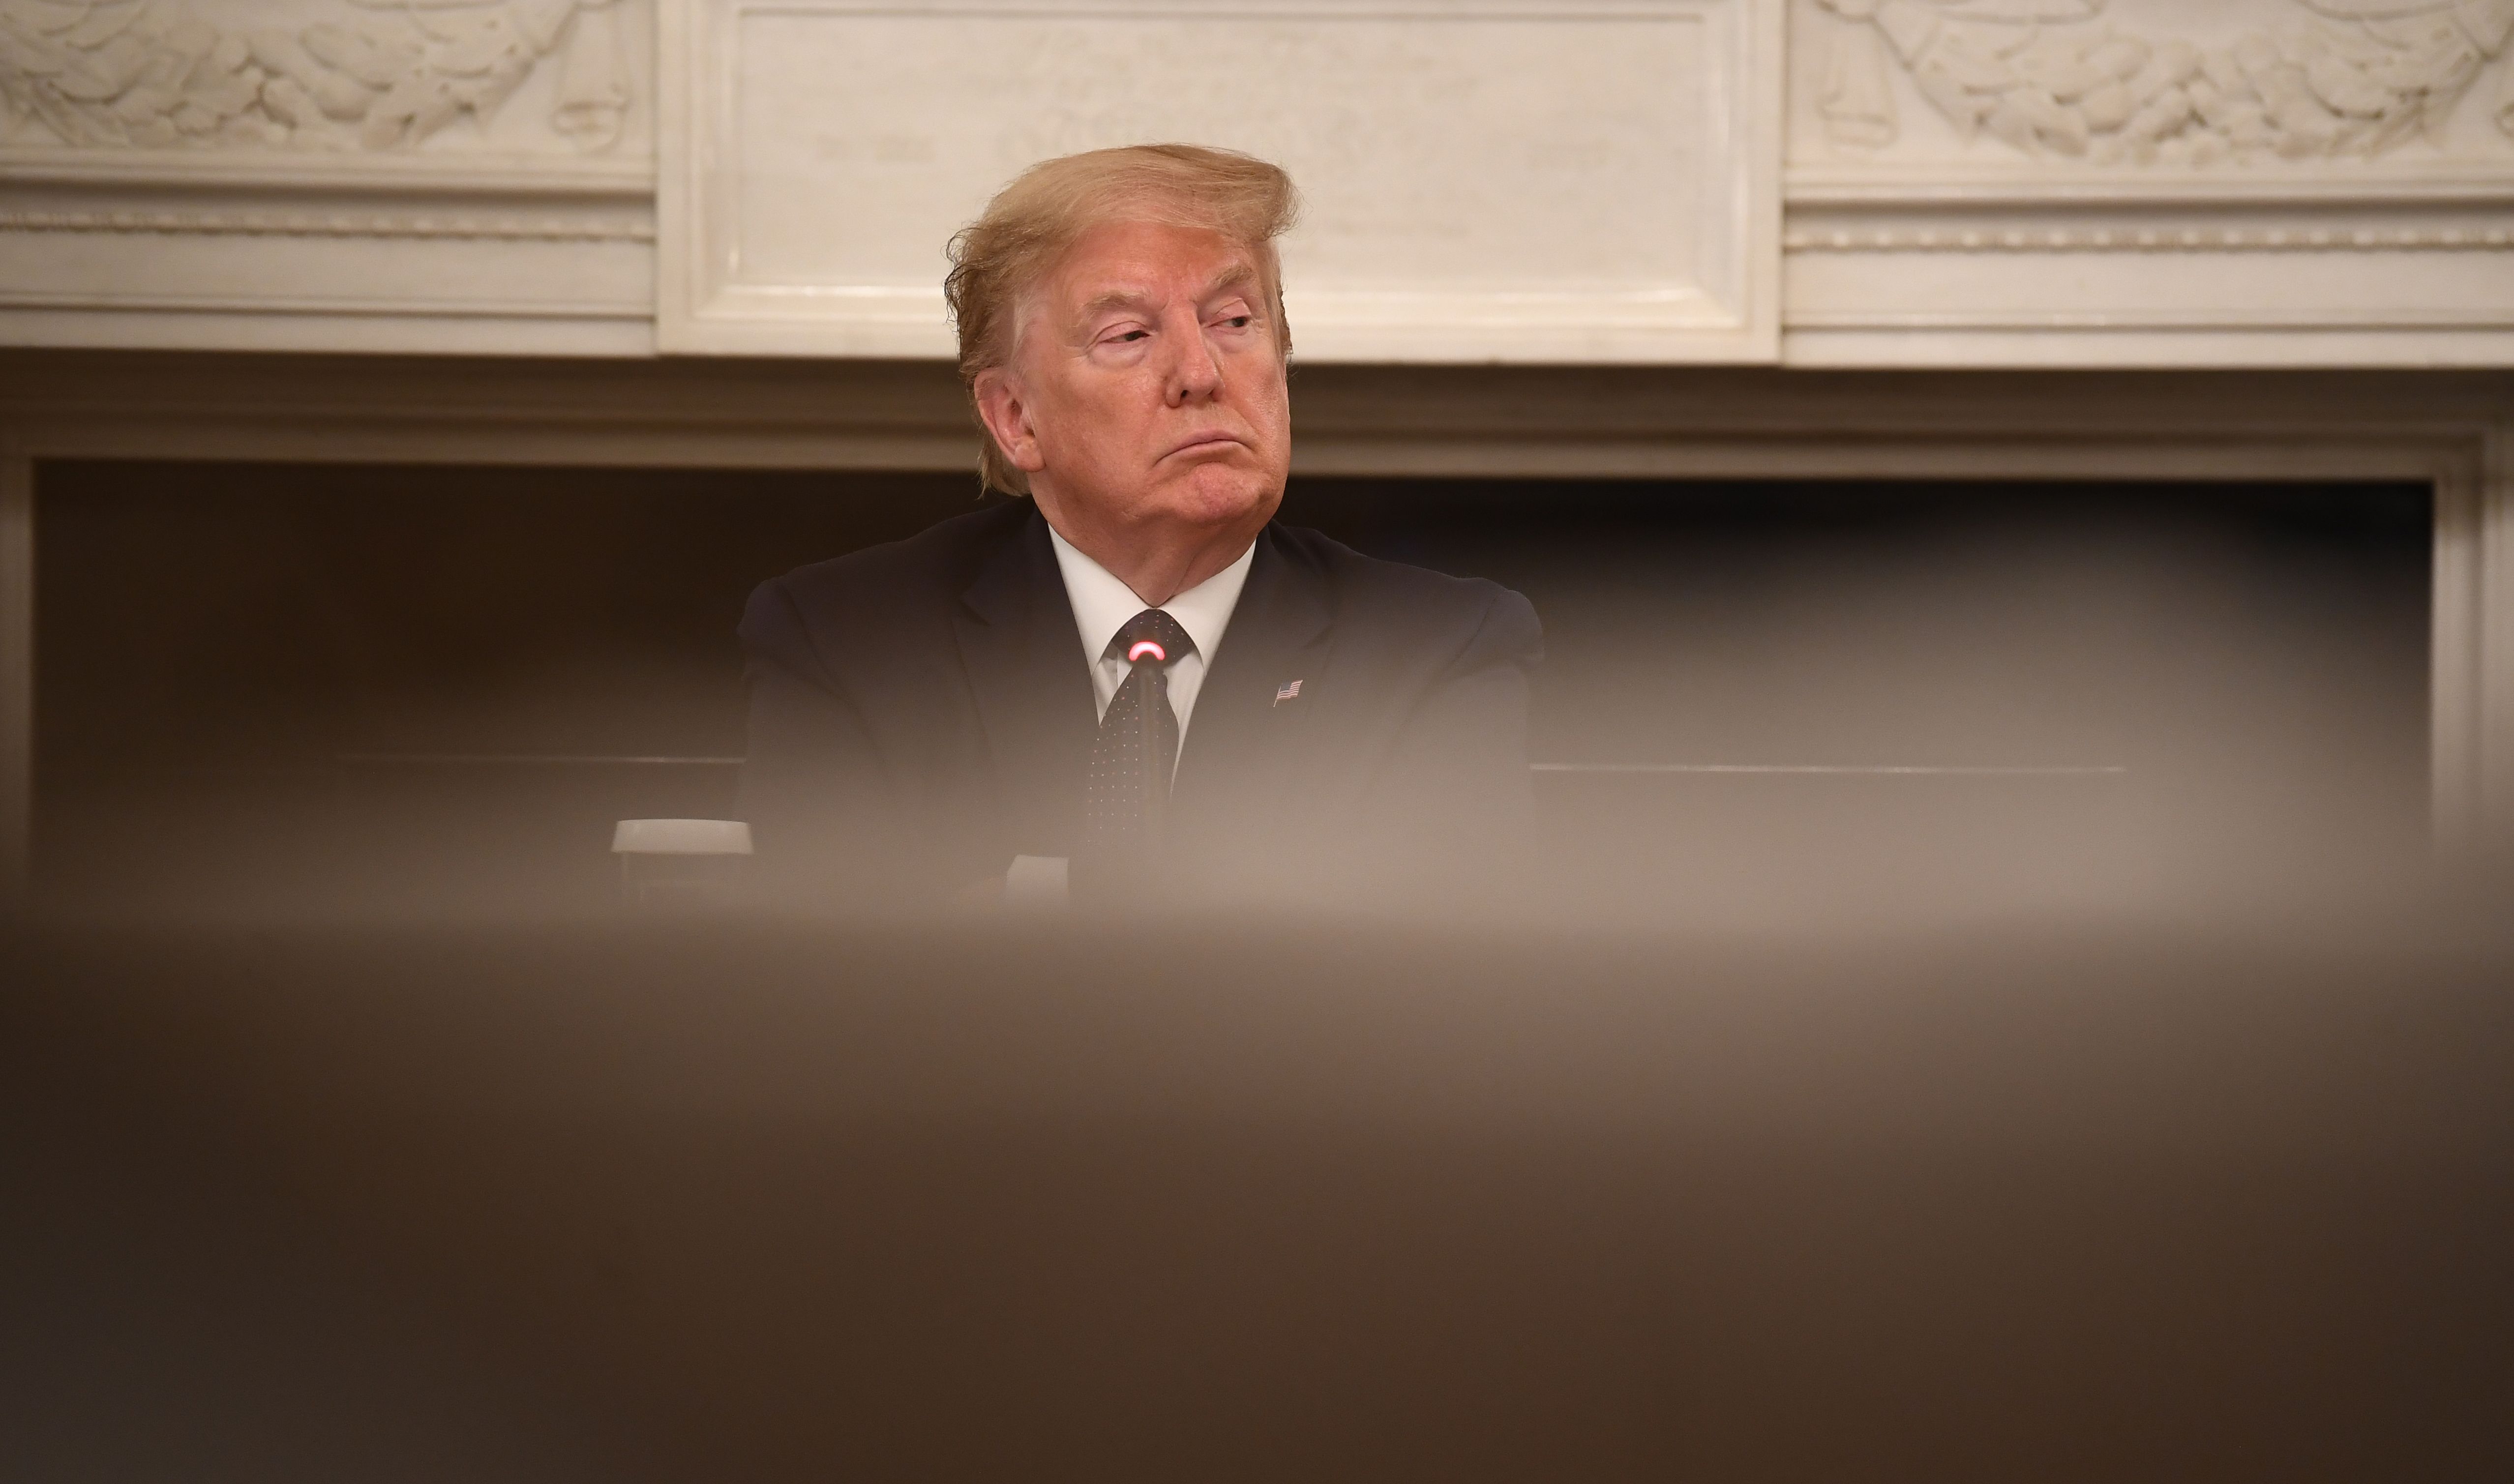 US President Donald Trump looks on during a meeting with resturant executives in the State Dining room of the White House May 18, 2020, in Washington, DC. (Photo by BRENDAN SMIALOWSKI/AFP via Getty Images)